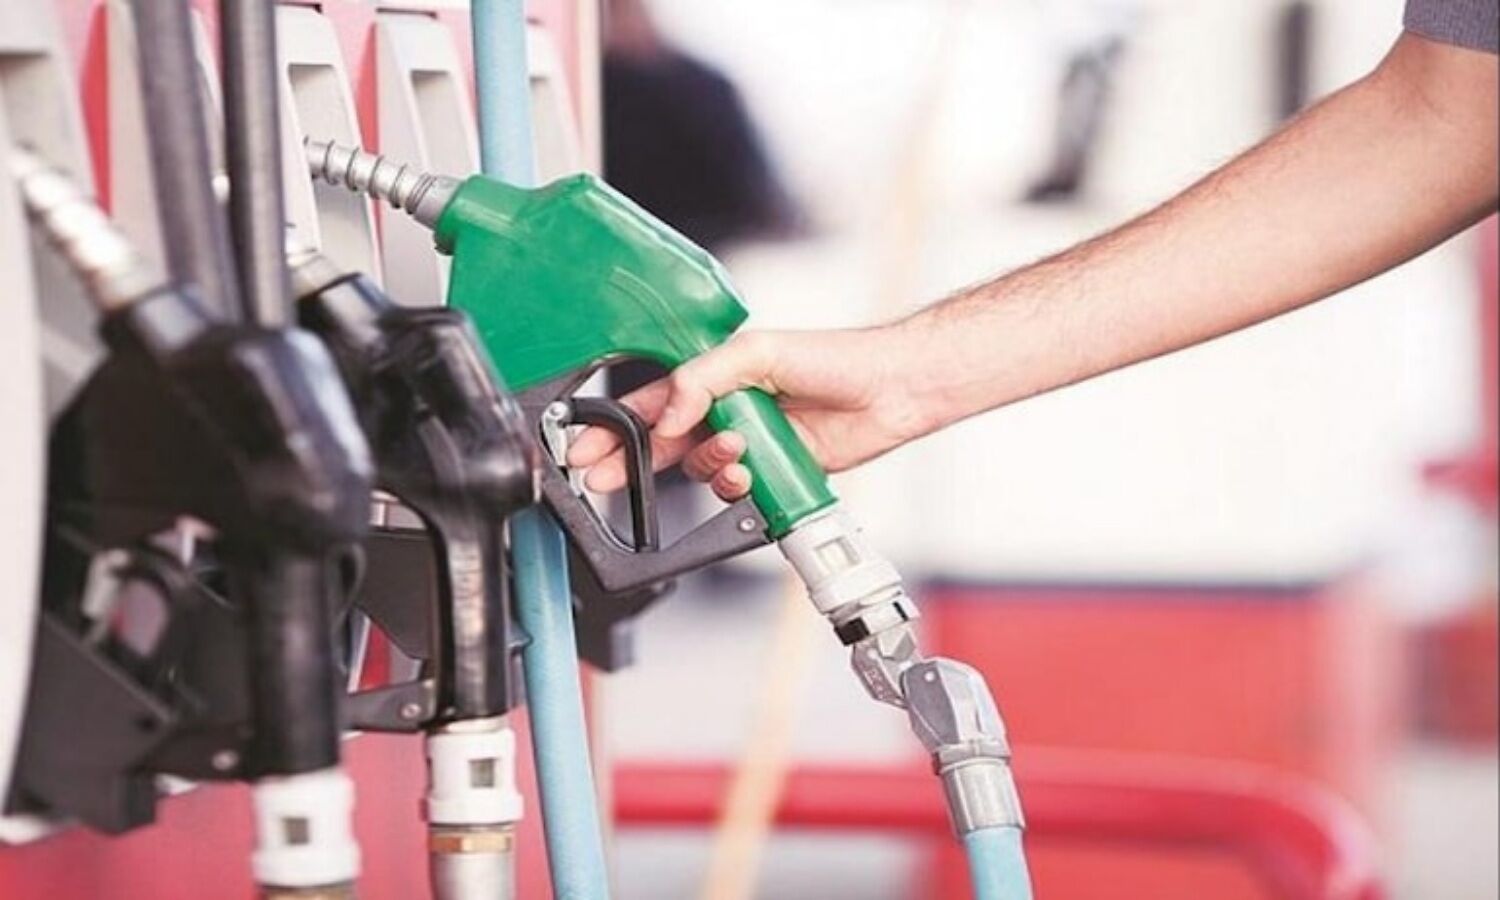 Petrol-Diesel Price Today: Expected to reduce the price of petrol and diesel, the effect of heavy fall in crude oil will be seen